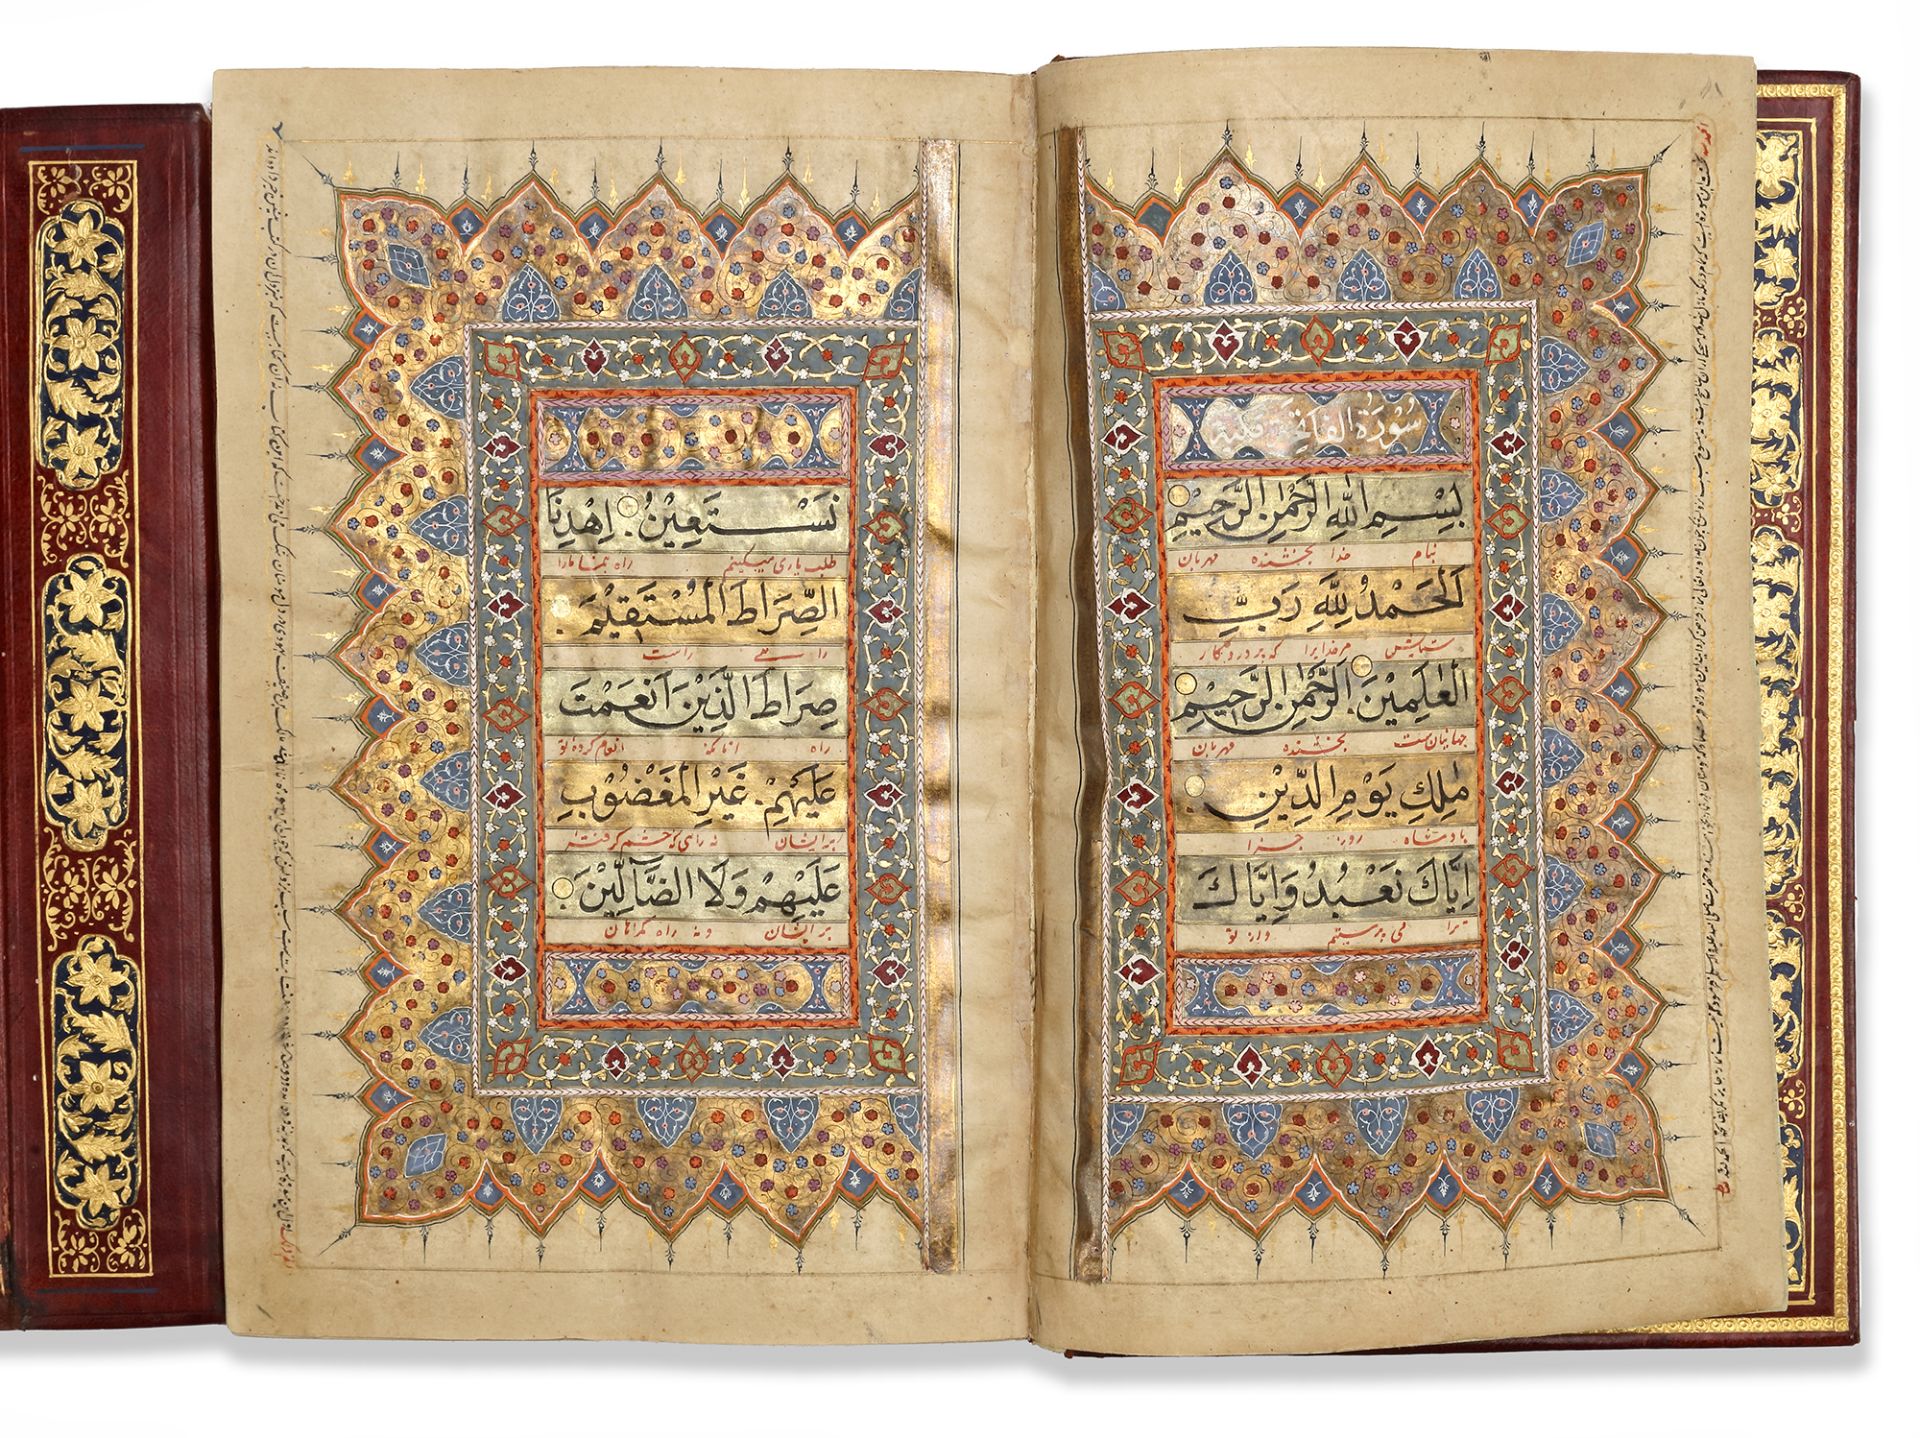 A FINELY ILLUMINATED QURAN, CENTRAL ASIA, 18TH CENTURY - Image 3 of 8